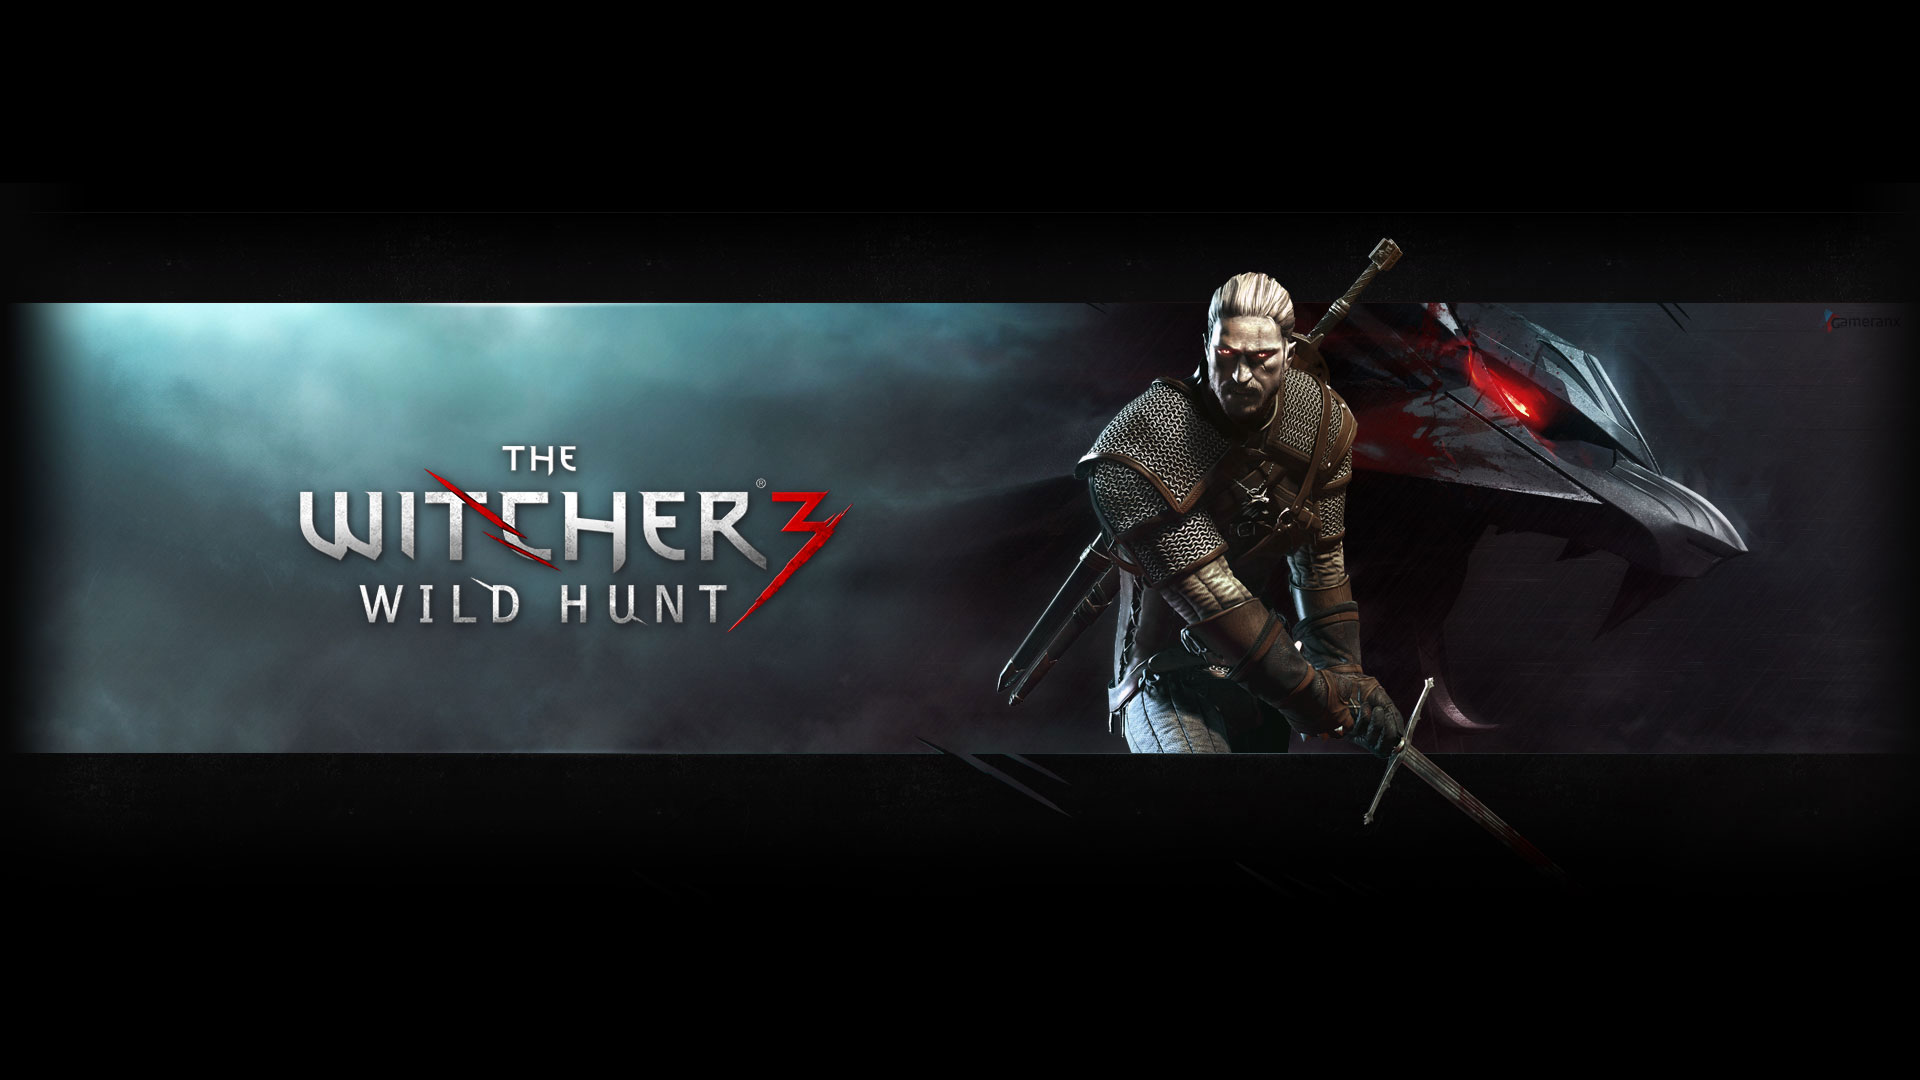 The Witcher 3 Wild Hunt Wallpapers HD Wallpapers 1920x1080